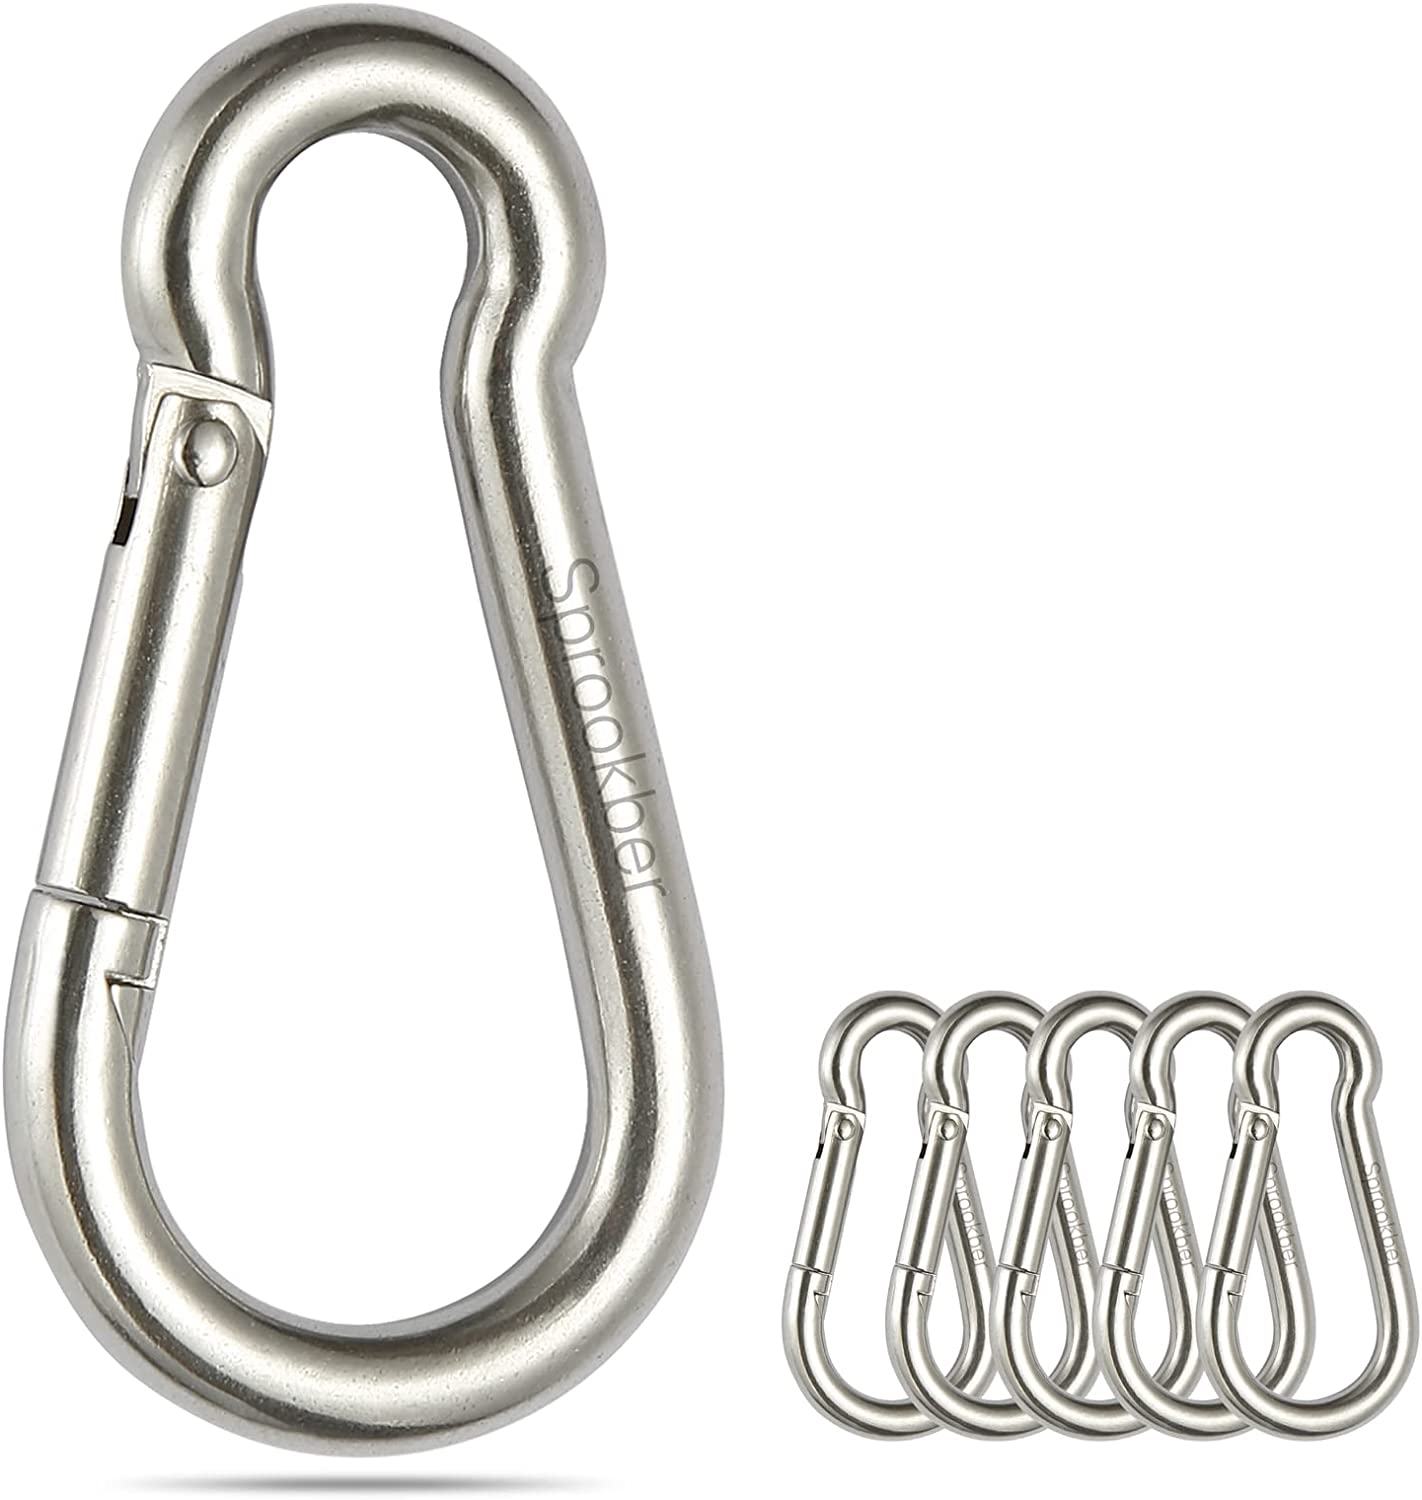 sprookber Snap-Hook 264-Pound Carrying Capacity Carabiner, 6-Piece